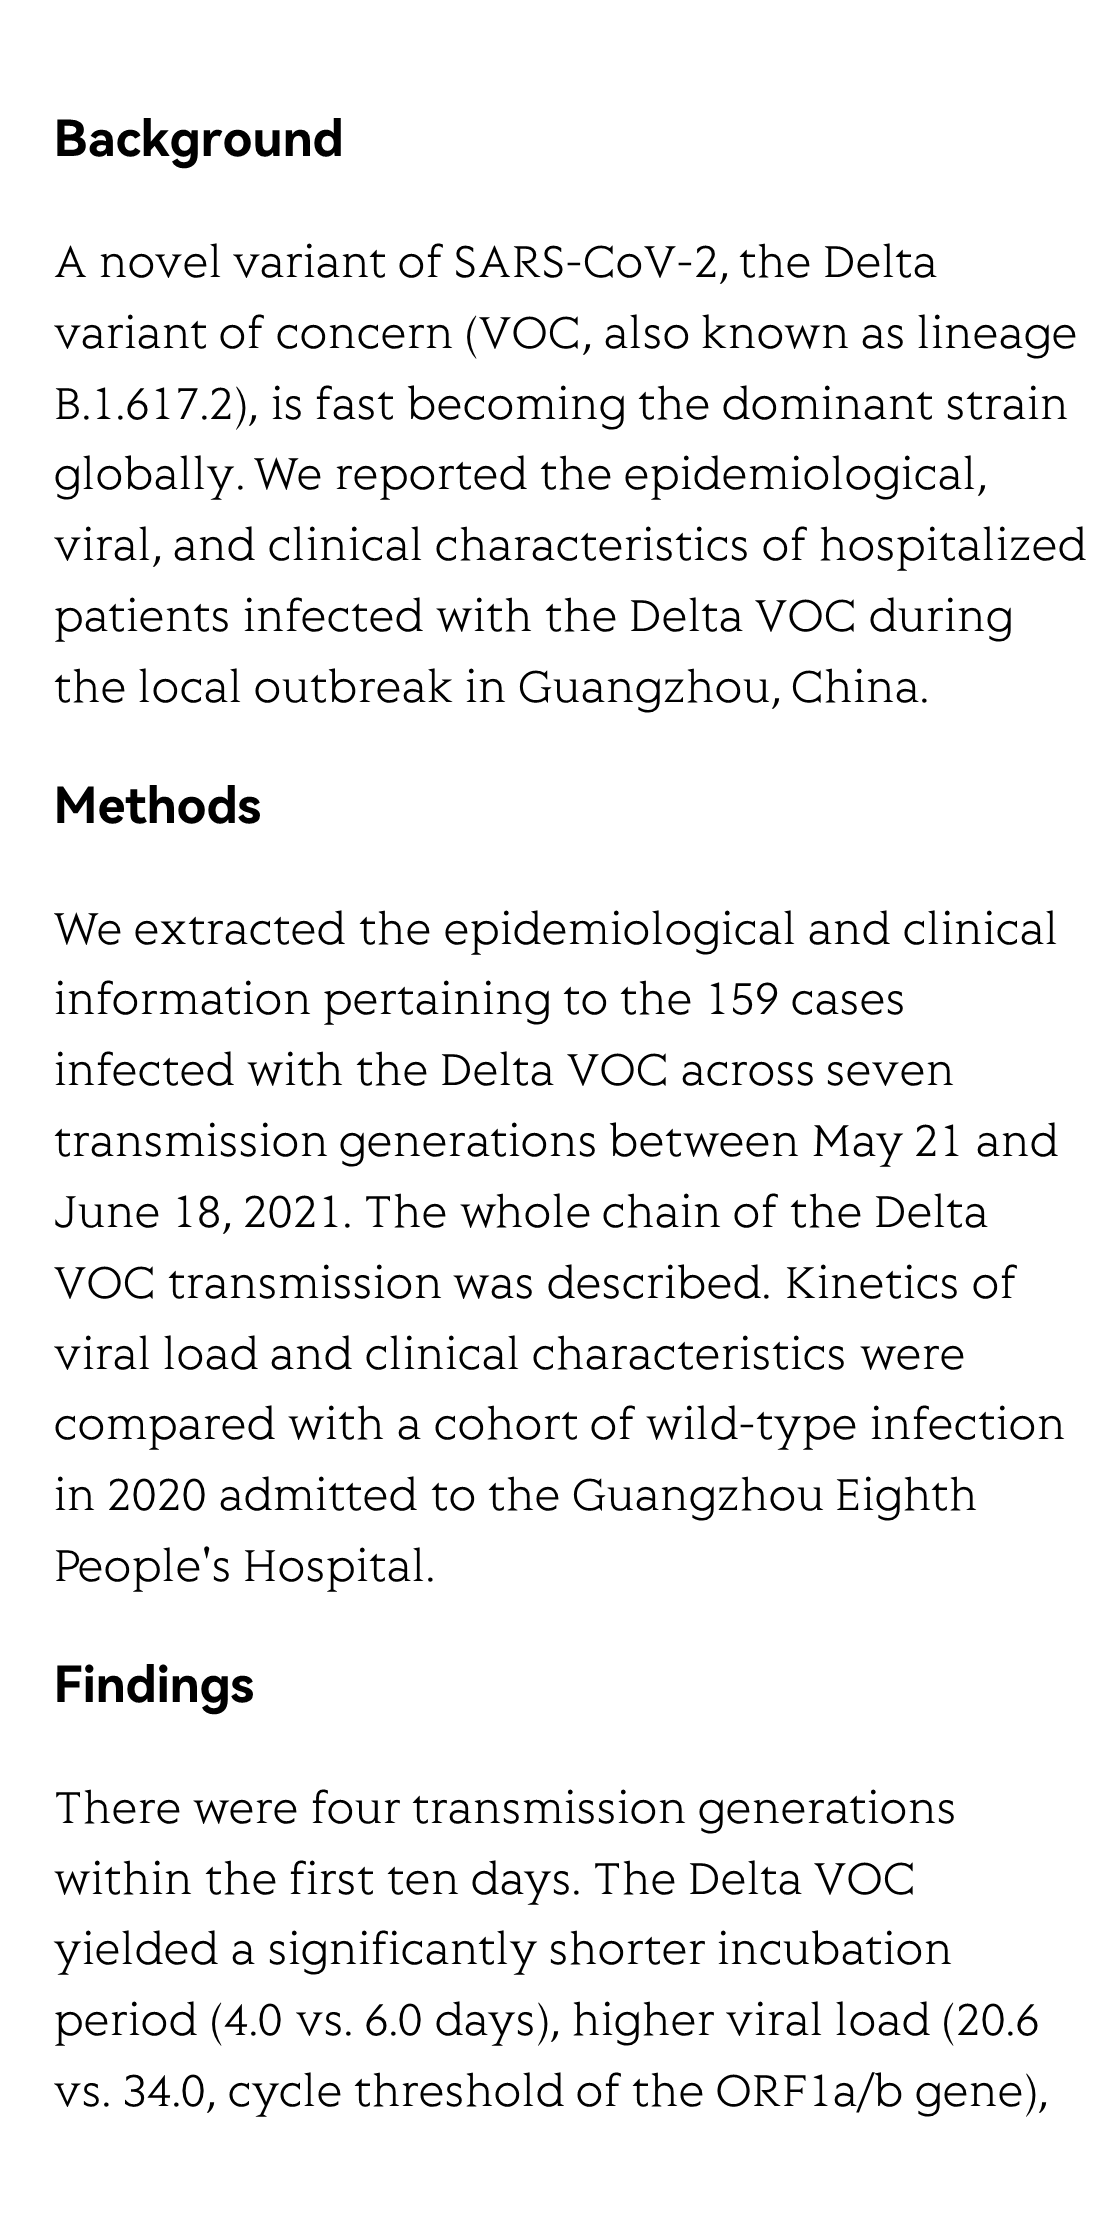 Transmission, viral kinetics and clinical characteristics of the emergent SARS-CoV-2 Delta VOC in Guangzhou, China_2